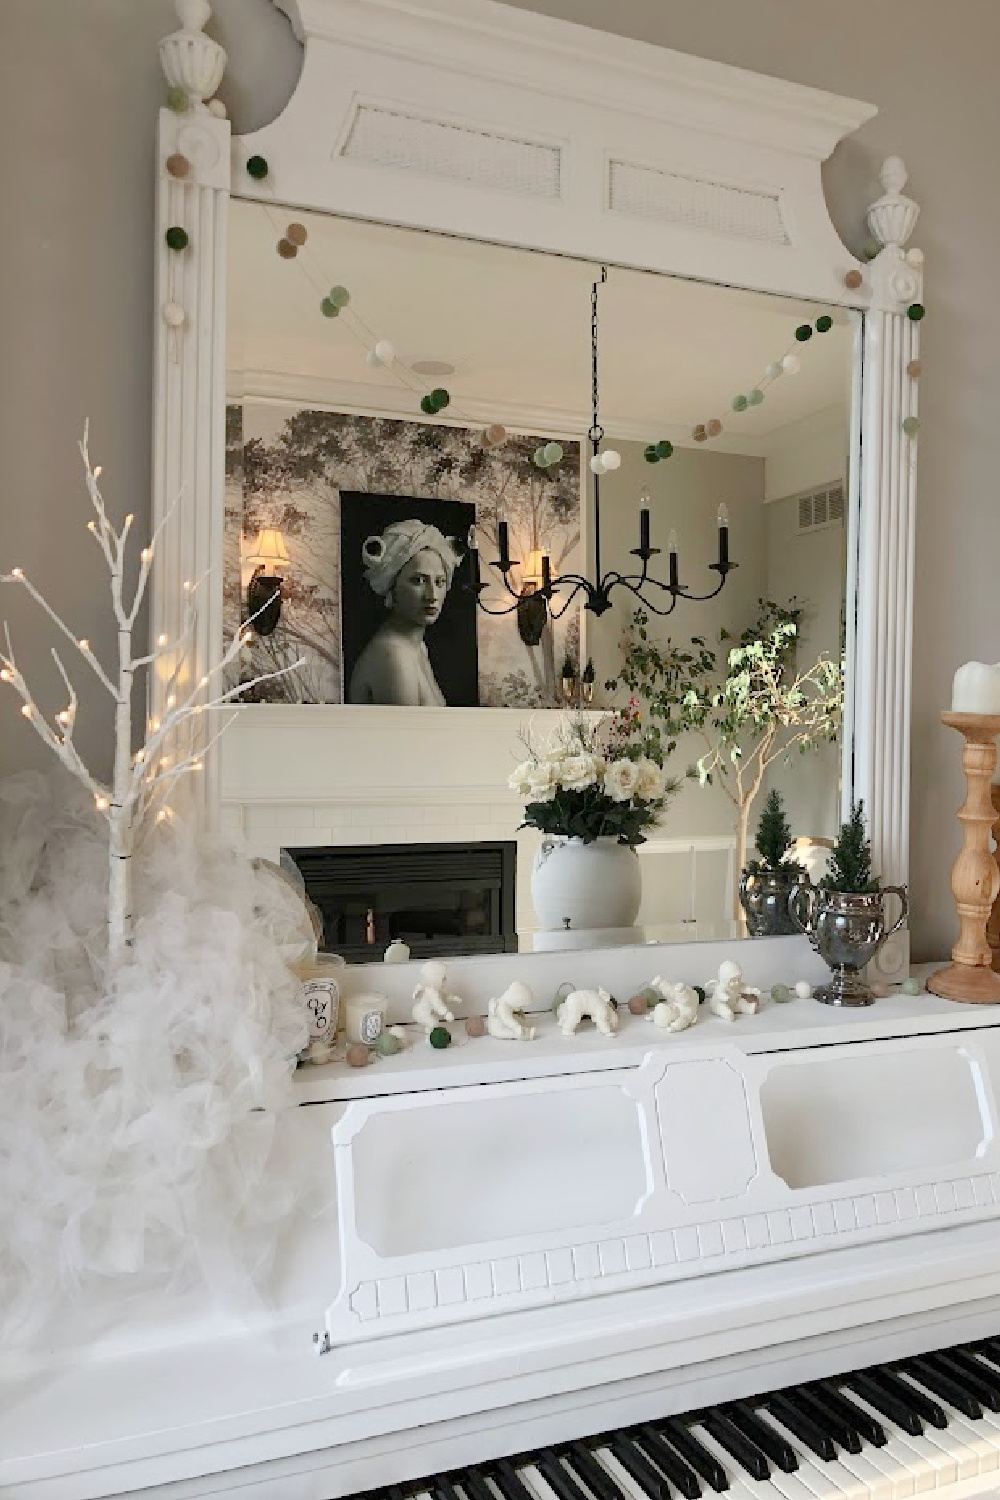 My vintage white piano decorated for holidays with snow babies, birch snowy tree, and felt garland - Hello Lovely Studio.